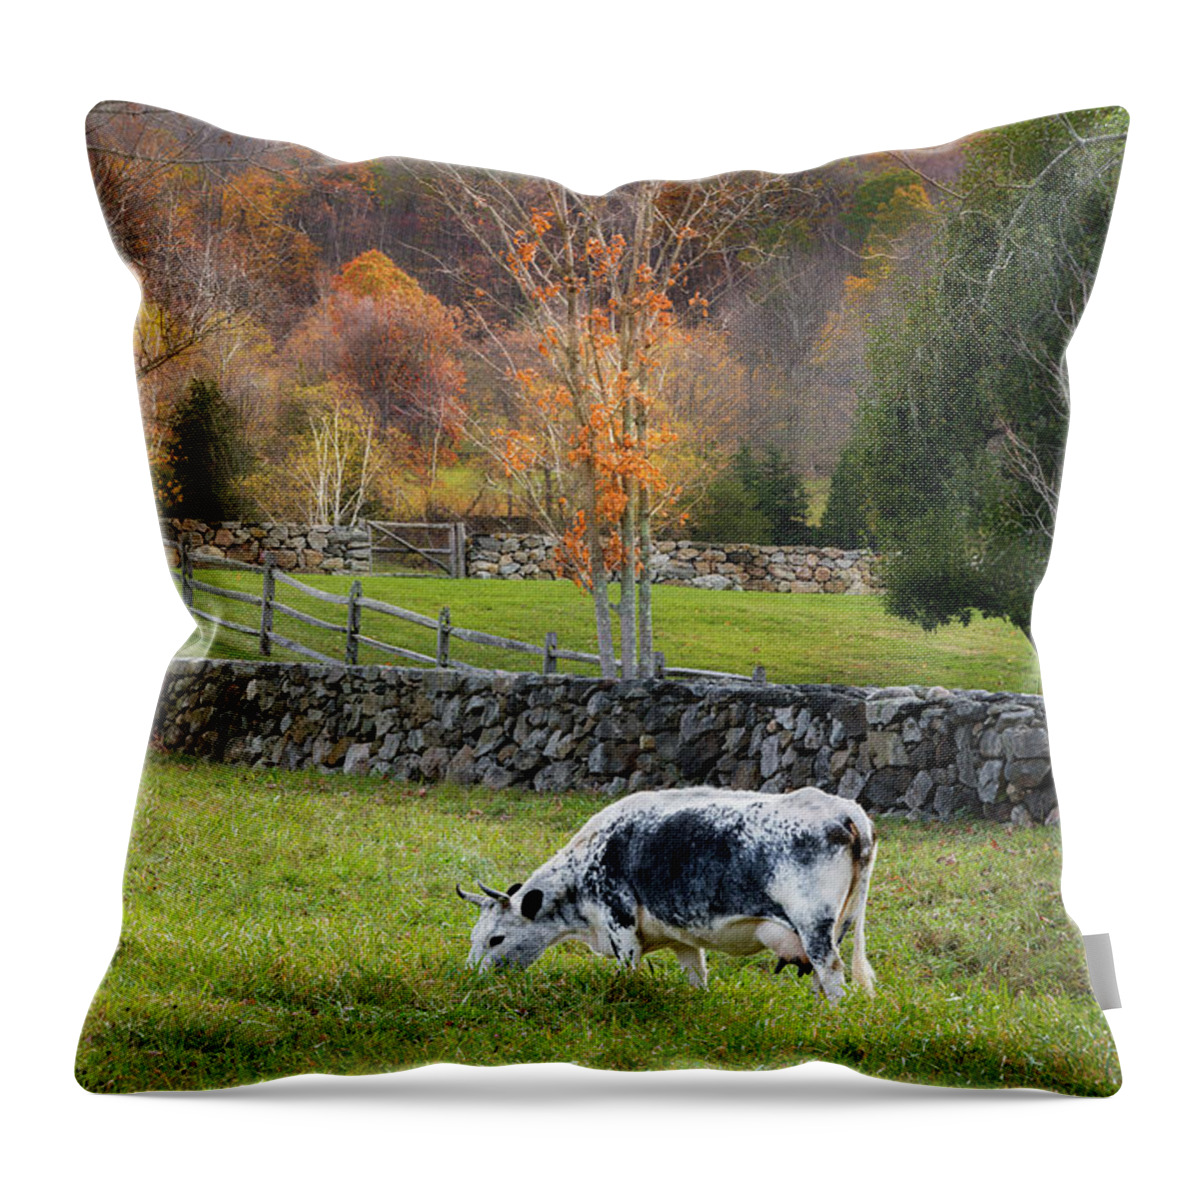 Randall Cattle Throw Pillow featuring the photograph Randall Cattle Cow by Bill Wakeley